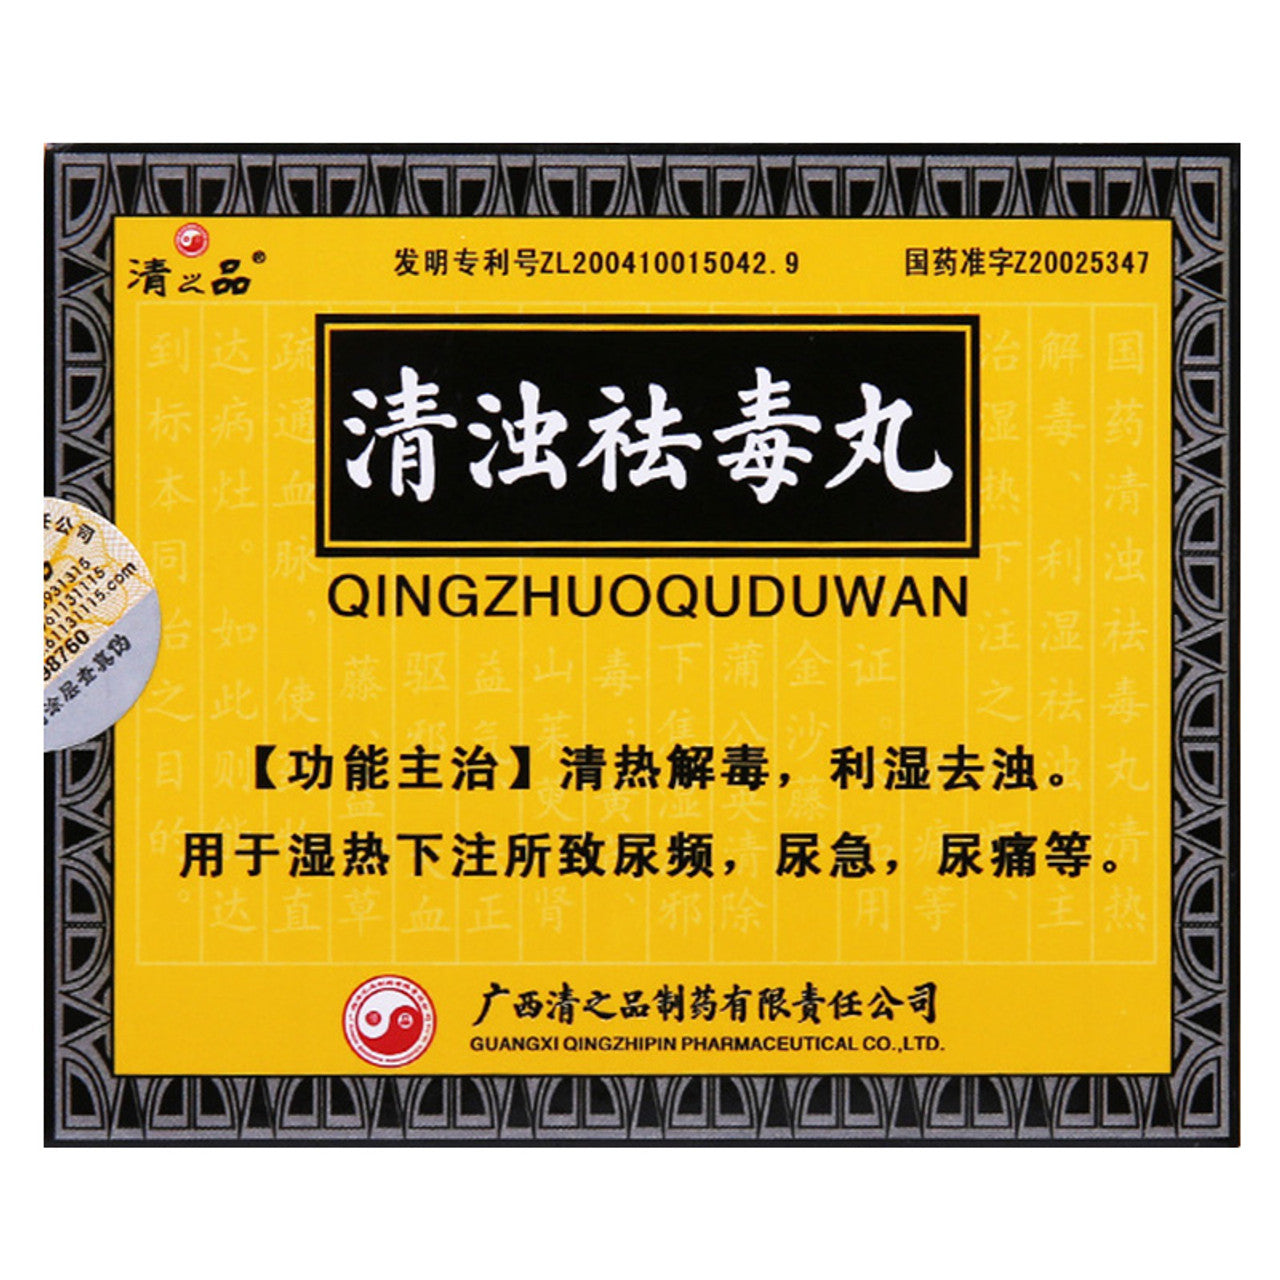 Chinese Herbs. Brand QINGZHIPIN. QINGZHUOQUDUWAN or Qingzhuo Qudu Wan or QingZhuo Qudu Pills or Qing Zhuo Qu Du Wan or Qing Zhuo Qu Du Pills for  frequent urination, urgency, and dysuria caused by hot and humid betting.